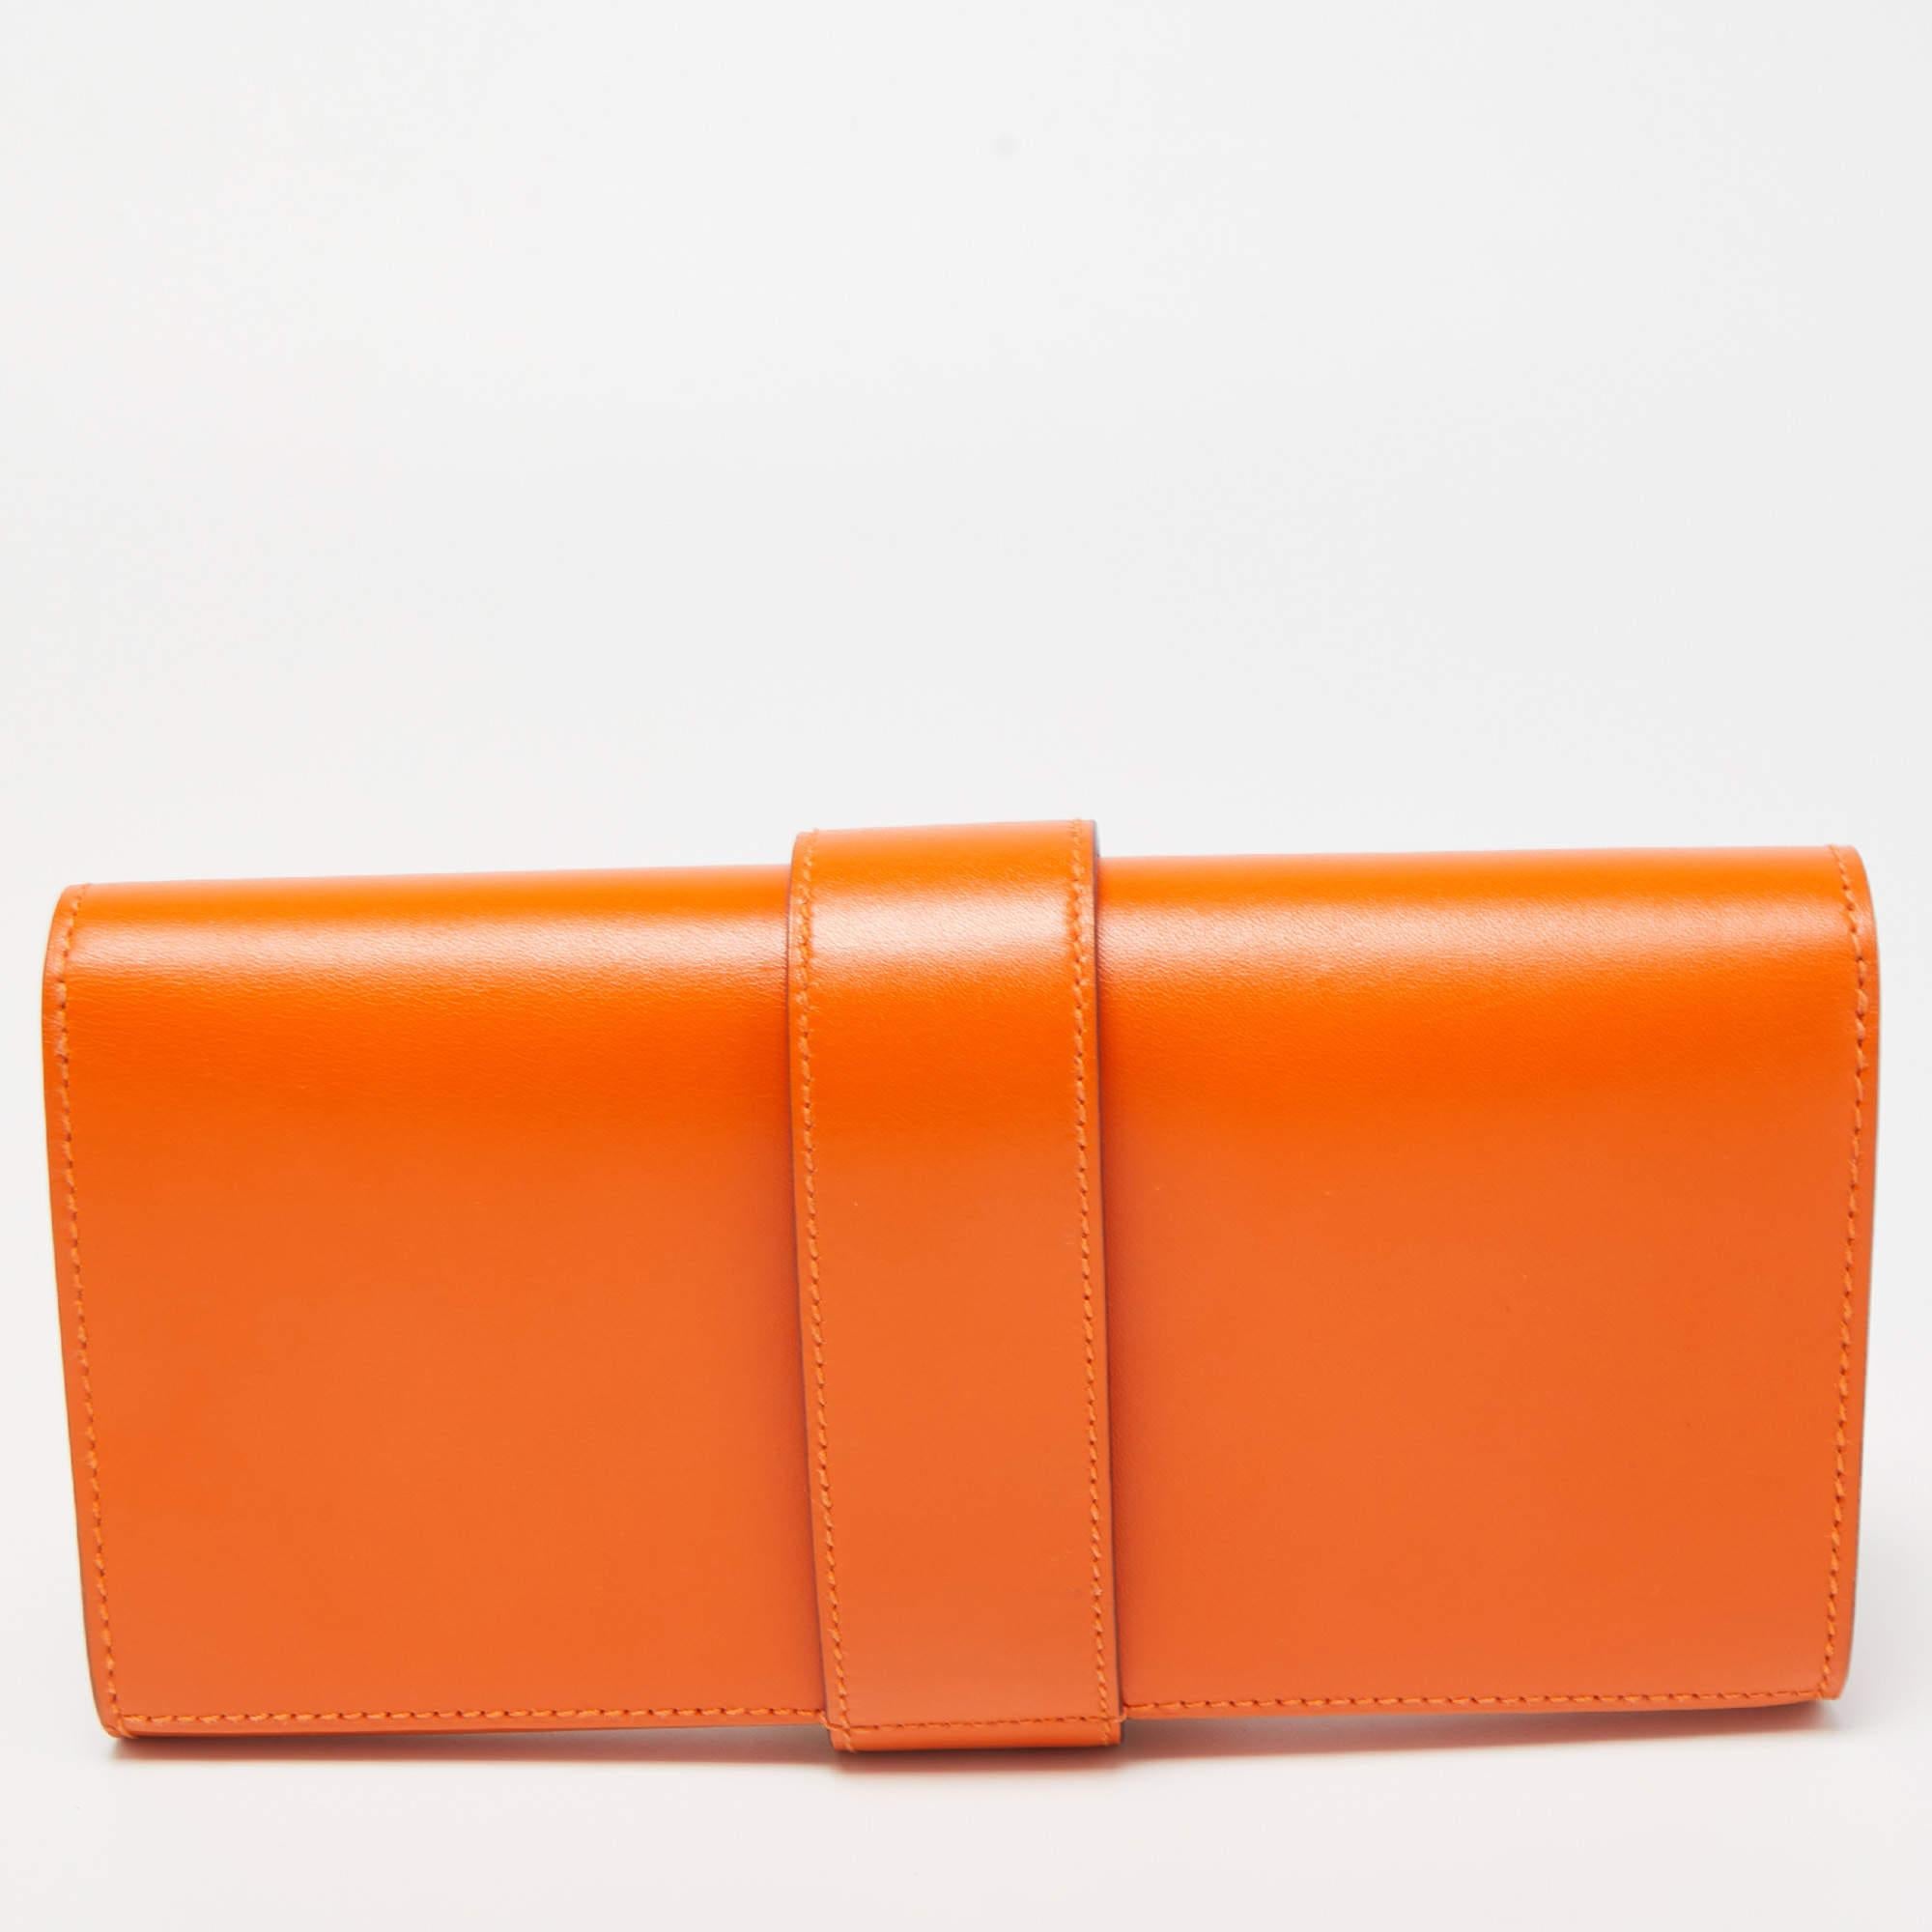 The Medor 23 clutch by Hermes is a creation that is not only well-made but also coveted around the world. It is a design that is simple and sophisticated, just right for the one who embodies class in a modern way. Meticulously crafted from leather,